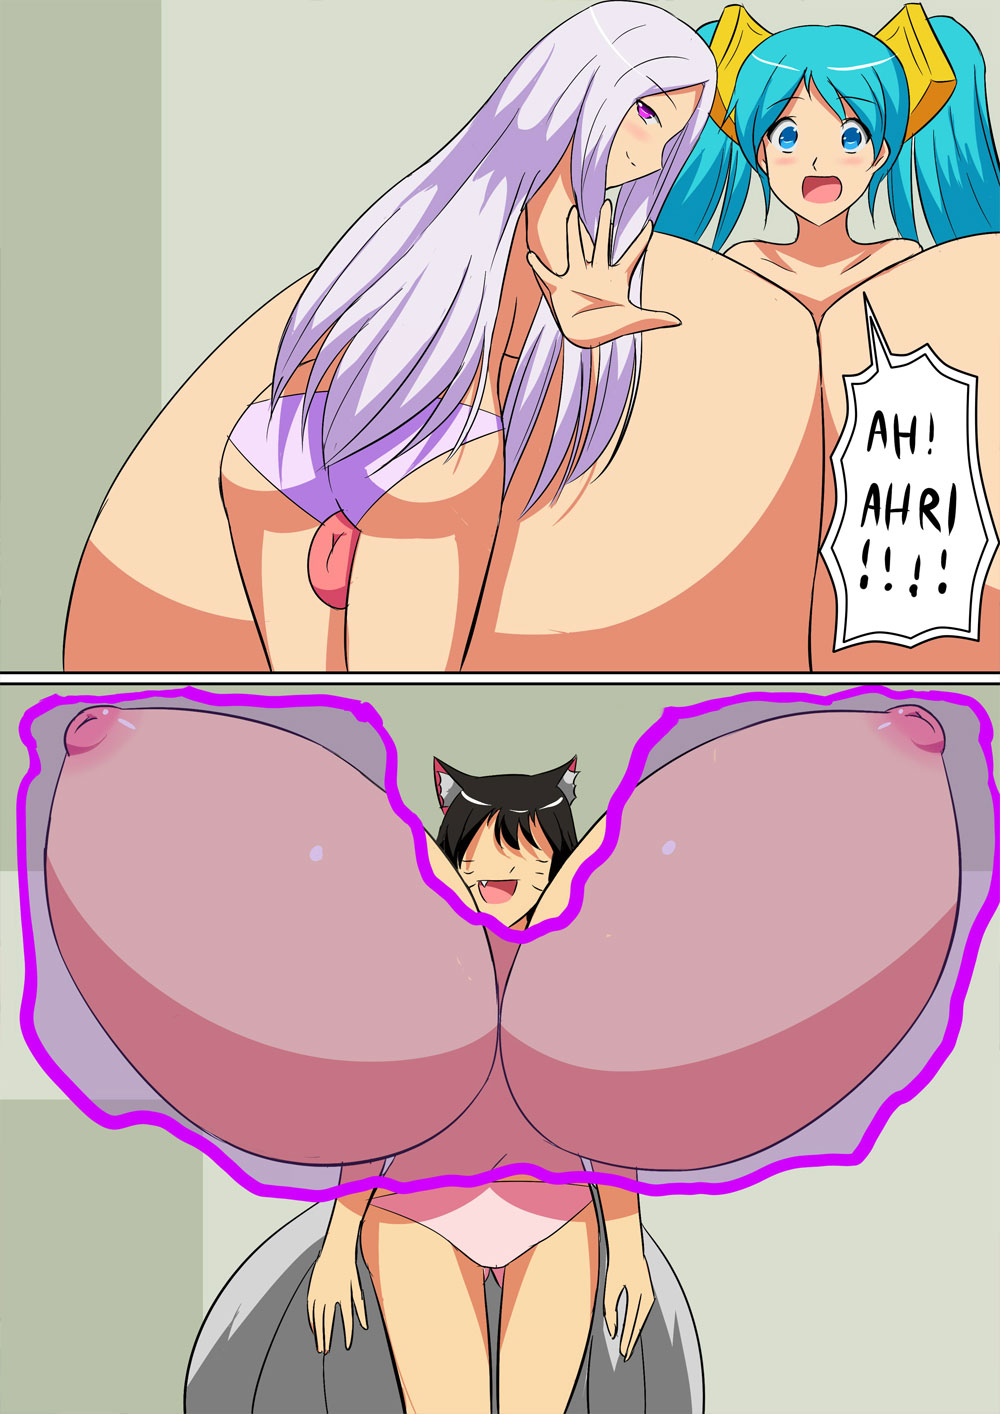 [xano501] Ahri X Sona X Syndra Growing Funny League Of Legends Hentai Online Porn Manga And